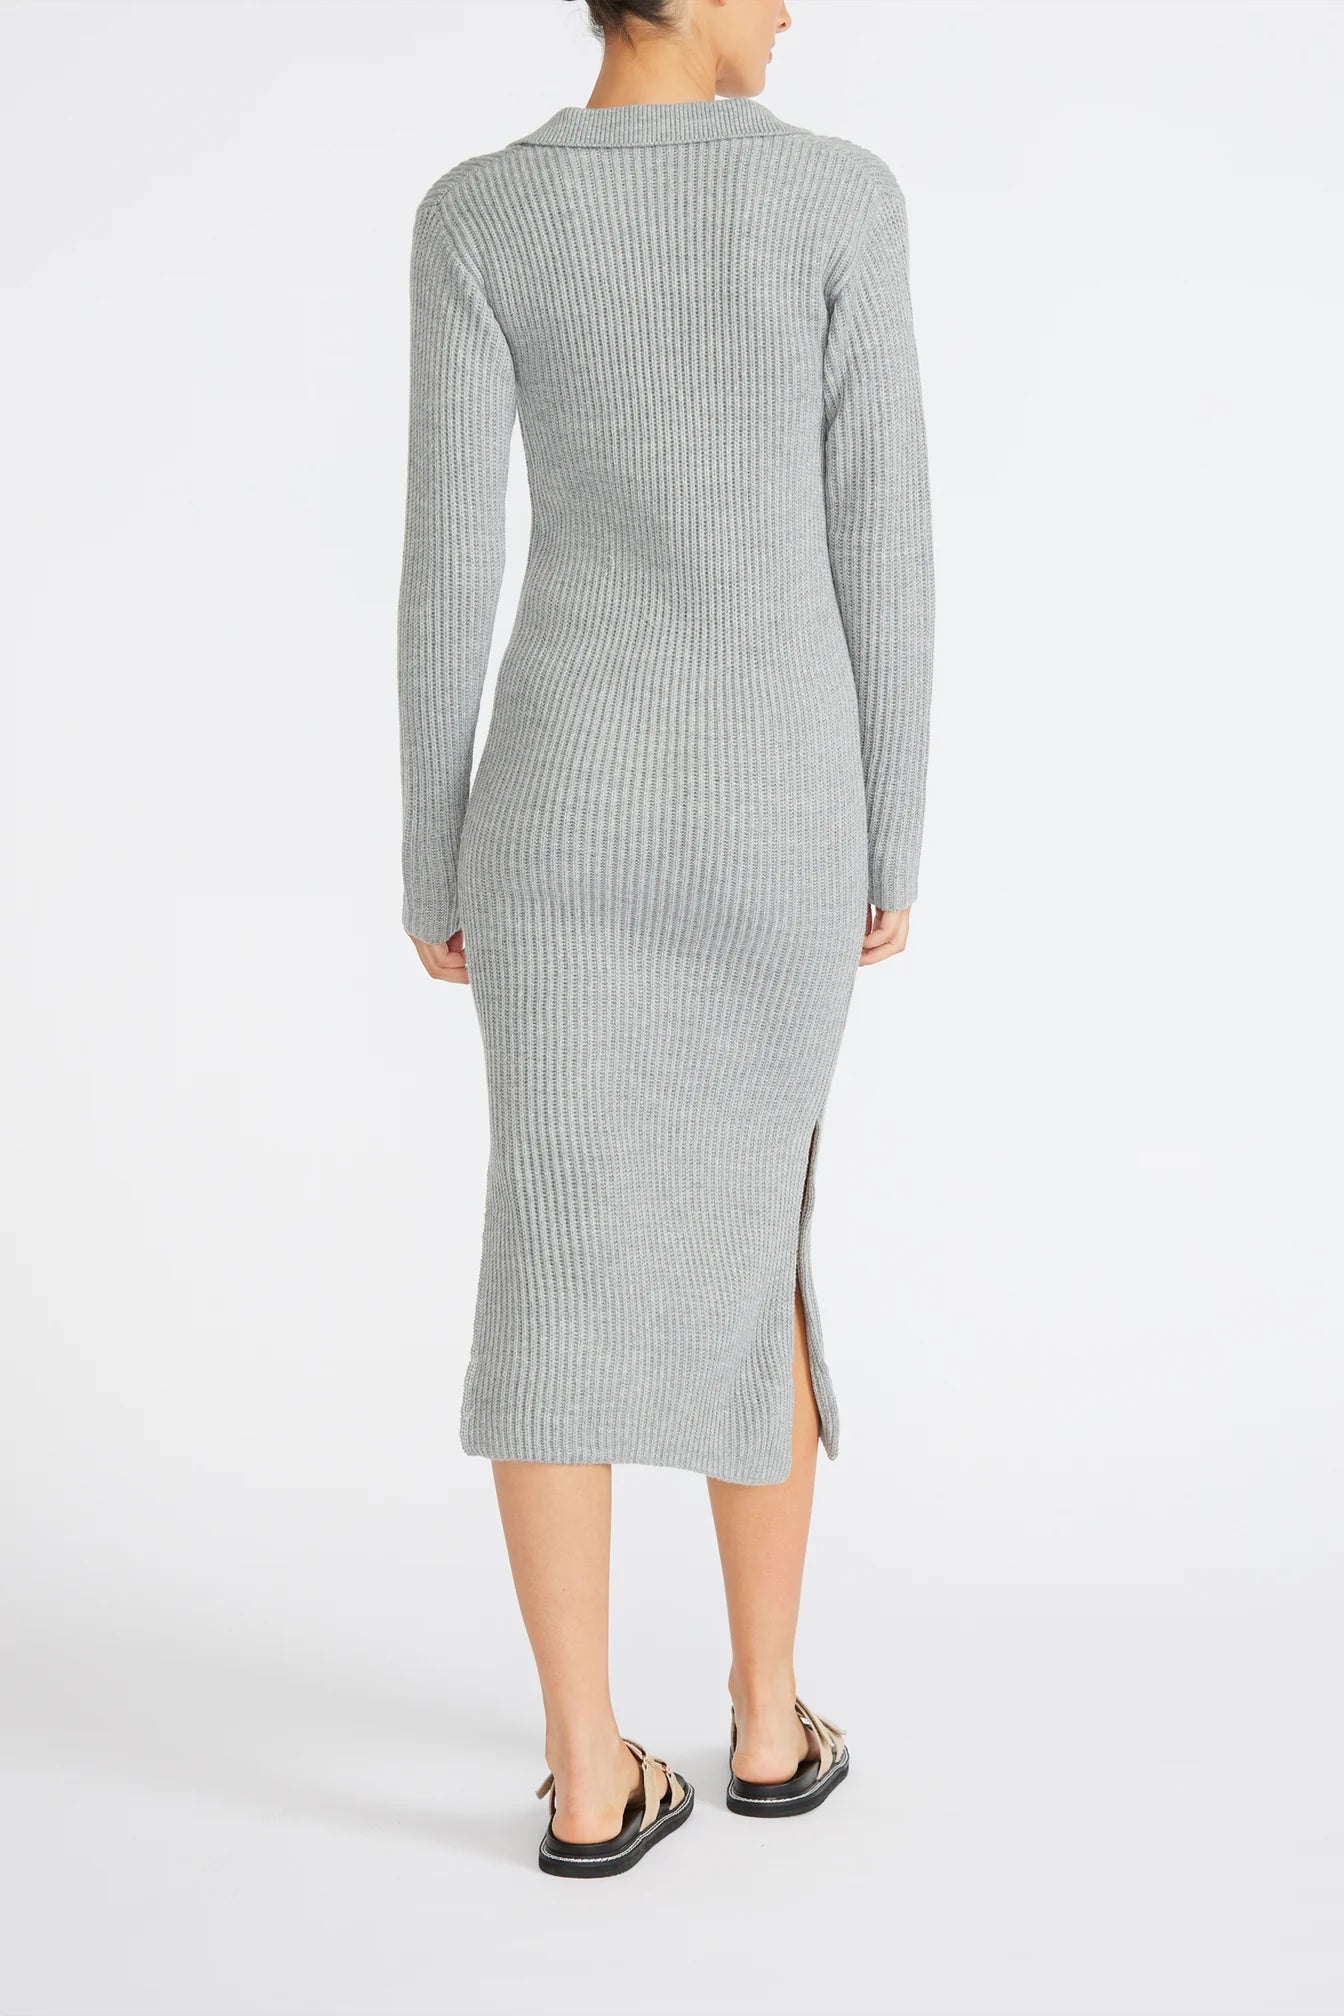 STAPLE THE LABEL - Ivy Knit Dress Grey Marle